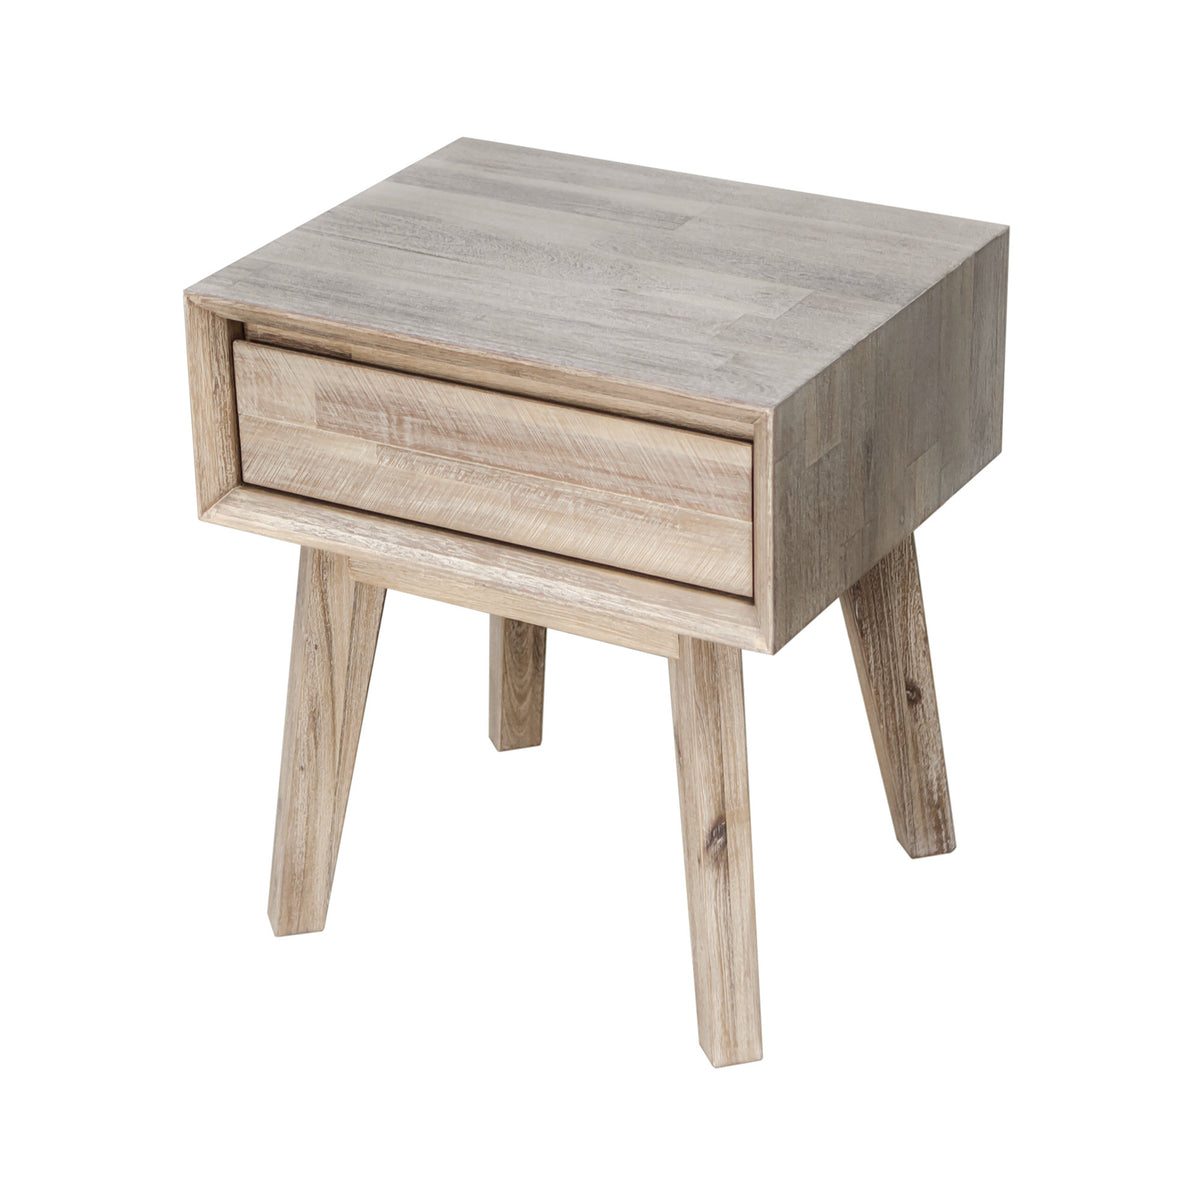 Gia 1 Drawer Nightstand Pre- order (December 10th Arrival)